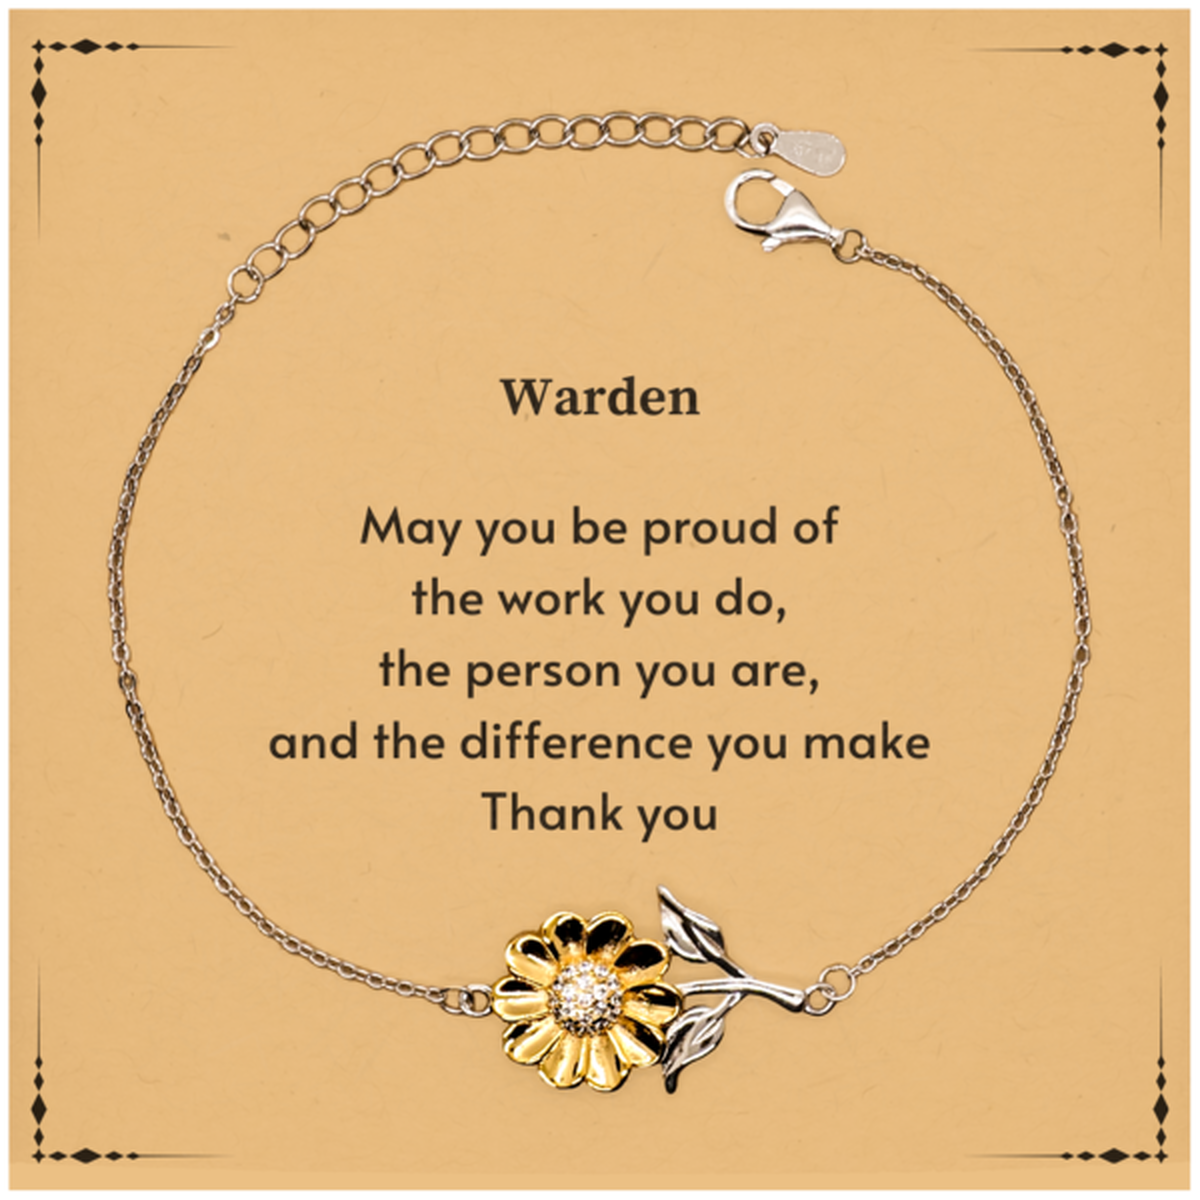 Heartwarming Sunflower Bracelet Retirement Coworkers Gifts for Warden, Warden May You be proud of the work you do, the person you are Gifts for Boss Men Women Friends